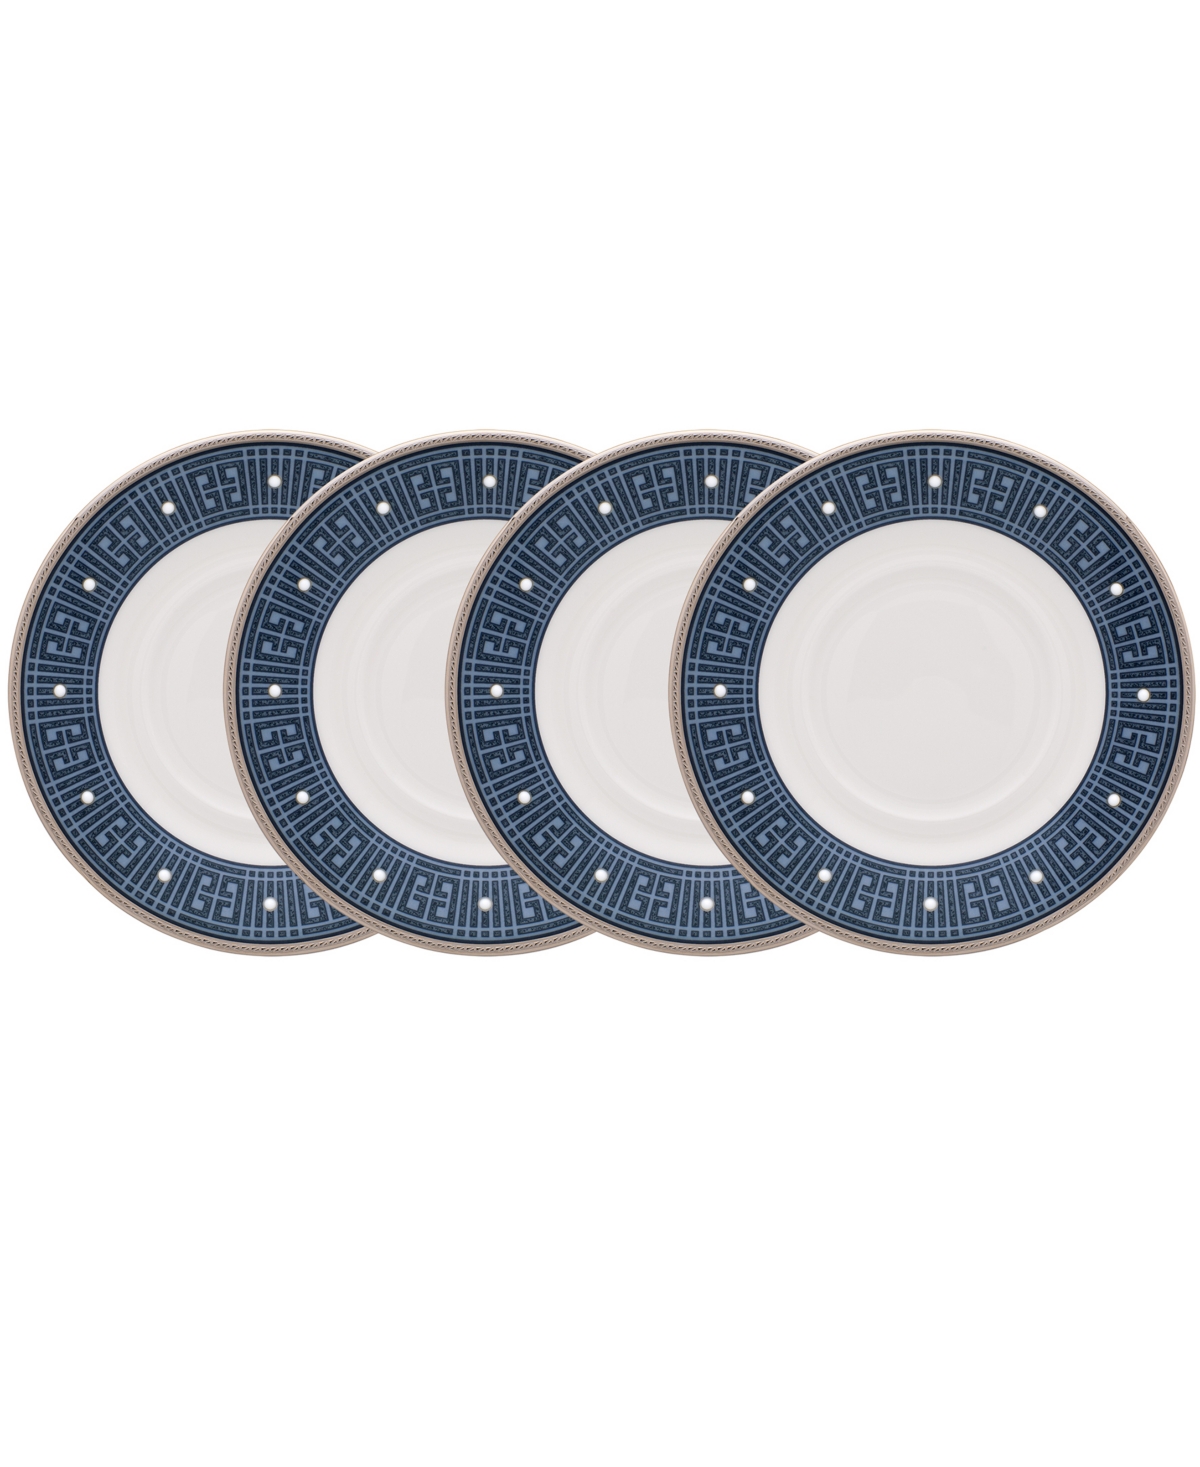 Noritake Infinity 4 Piece Saucer Set, Service For 4 In Blue